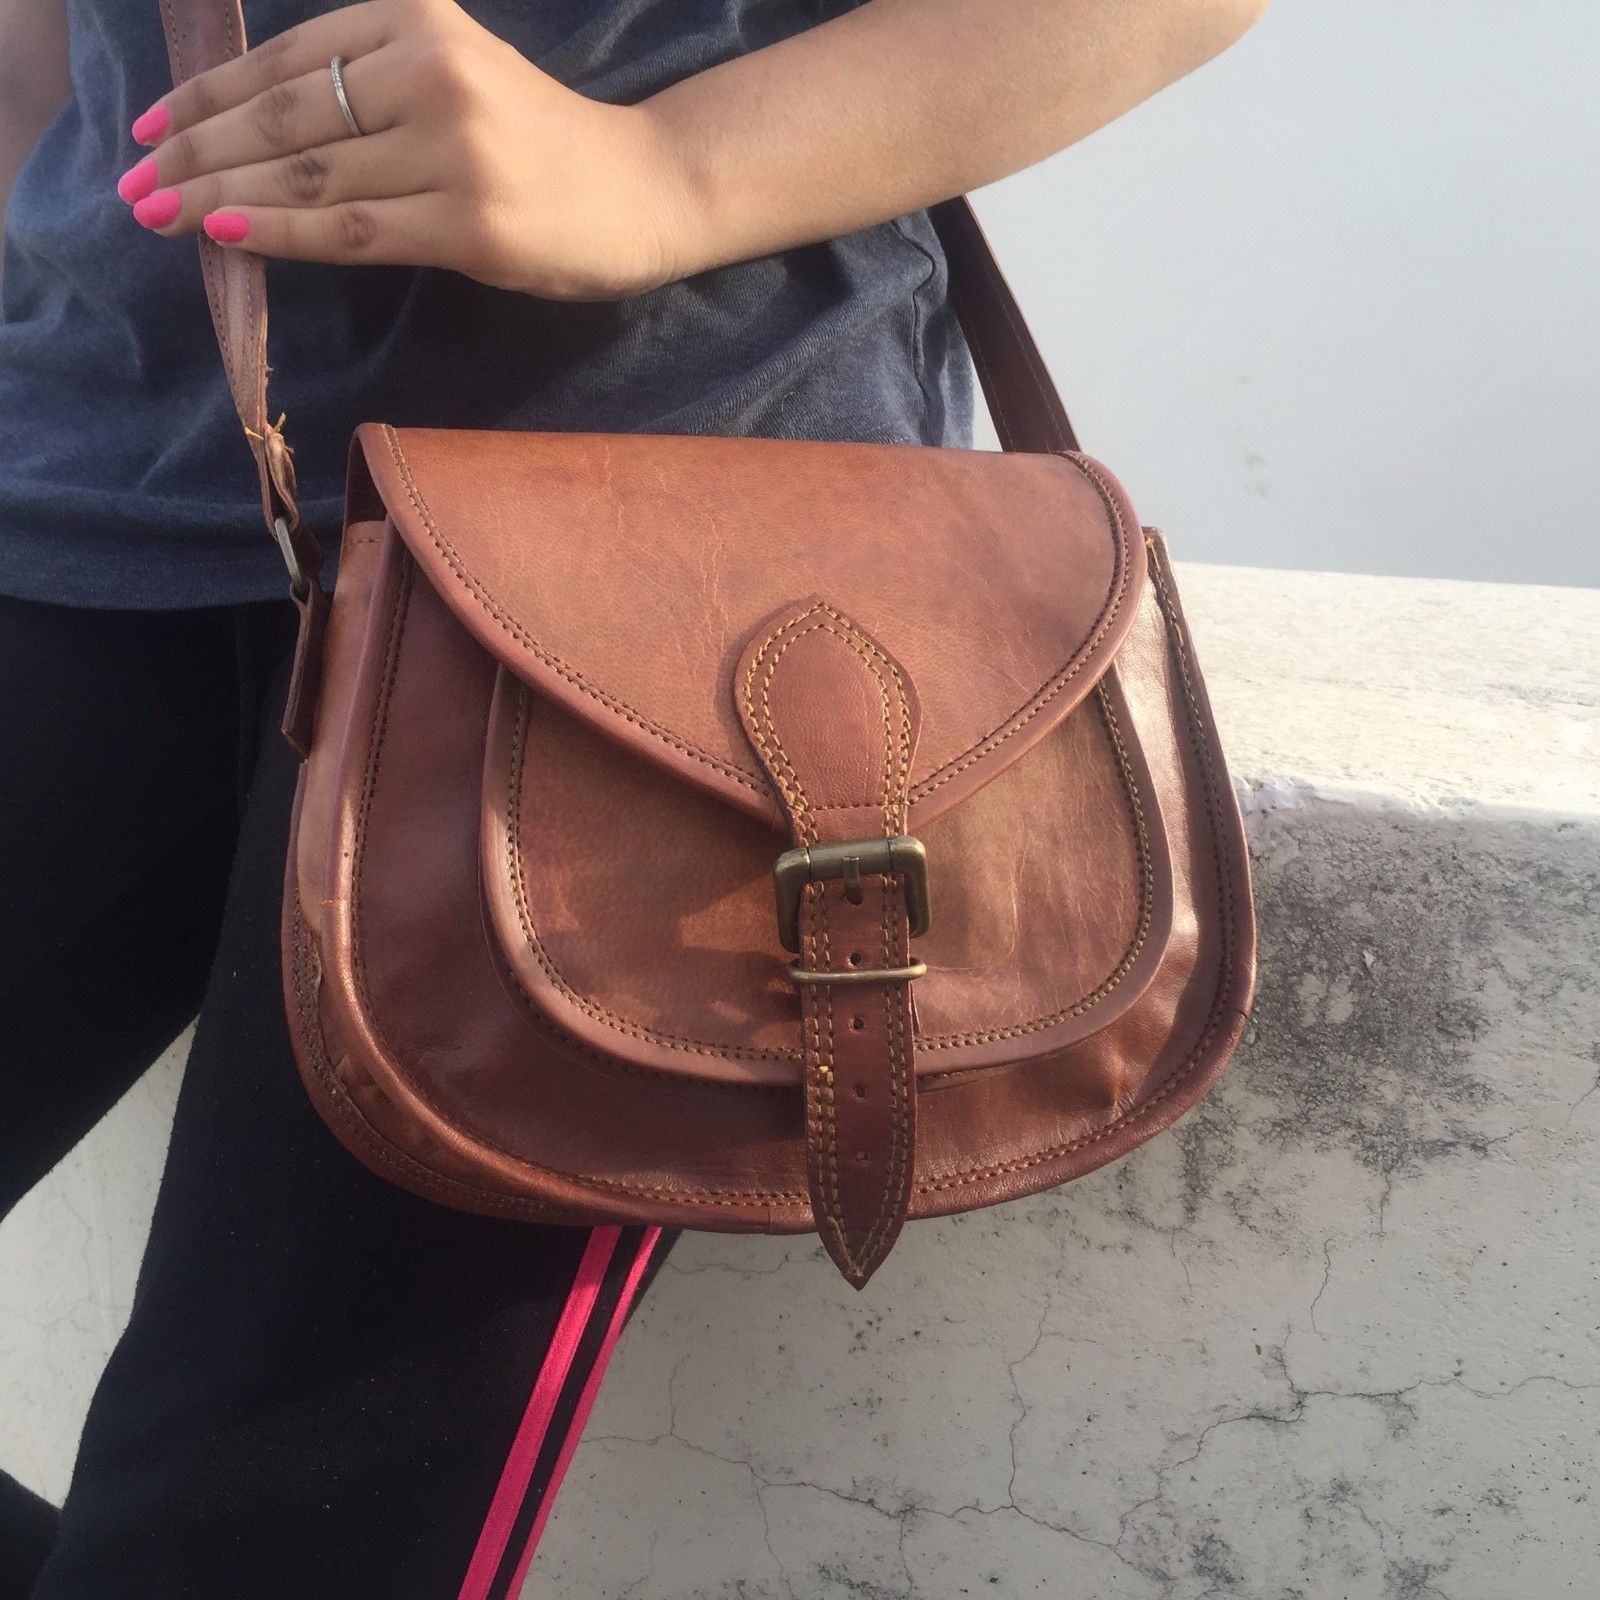 Goat Leather All-match Handbag Lovely Casual Practical Cross-body ...